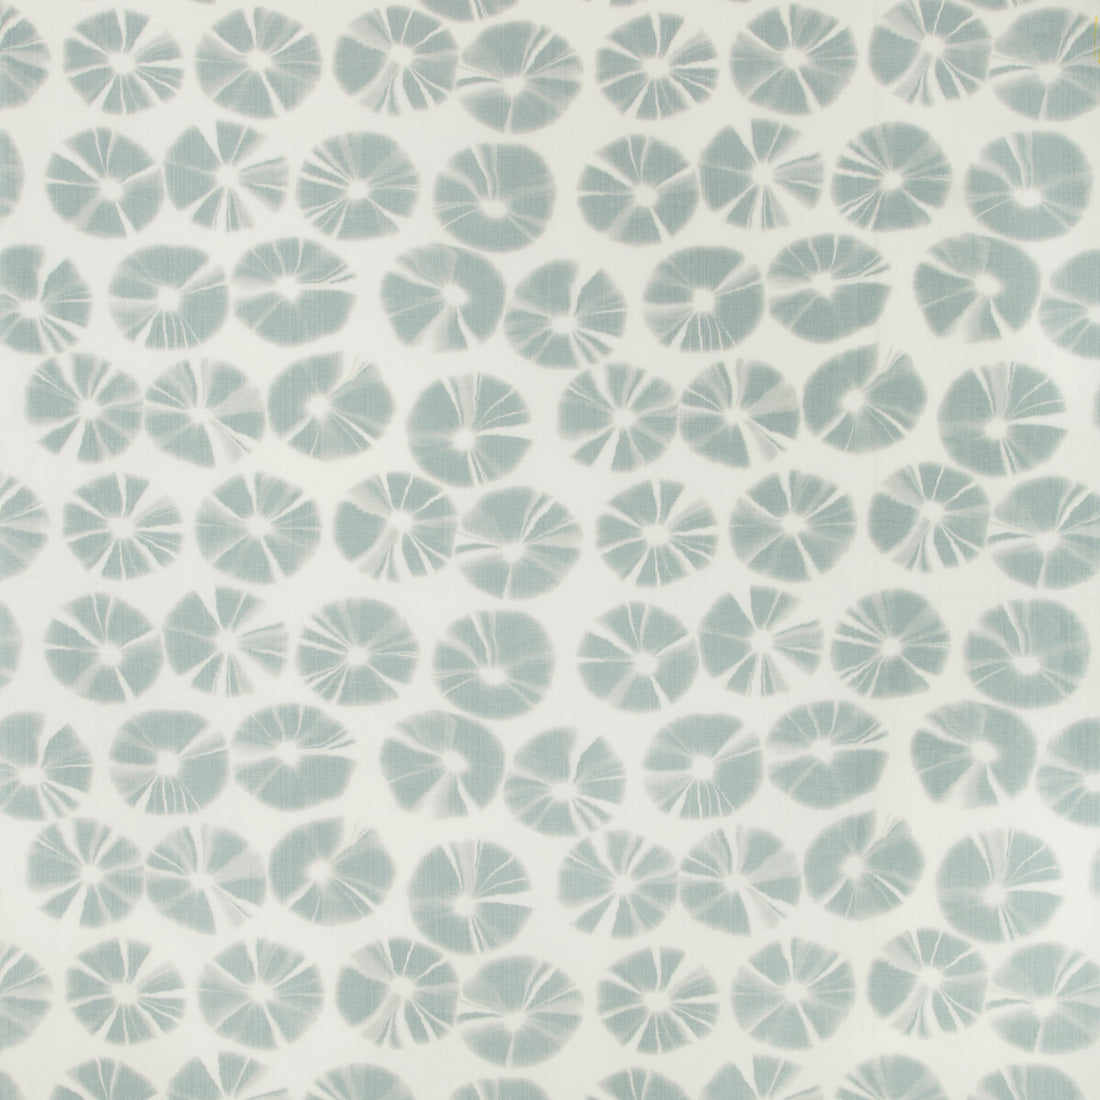 Echino fabric in seaglass color - pattern ECHINO.513.0 - by Kravet Couture in the Terrae Prints collection